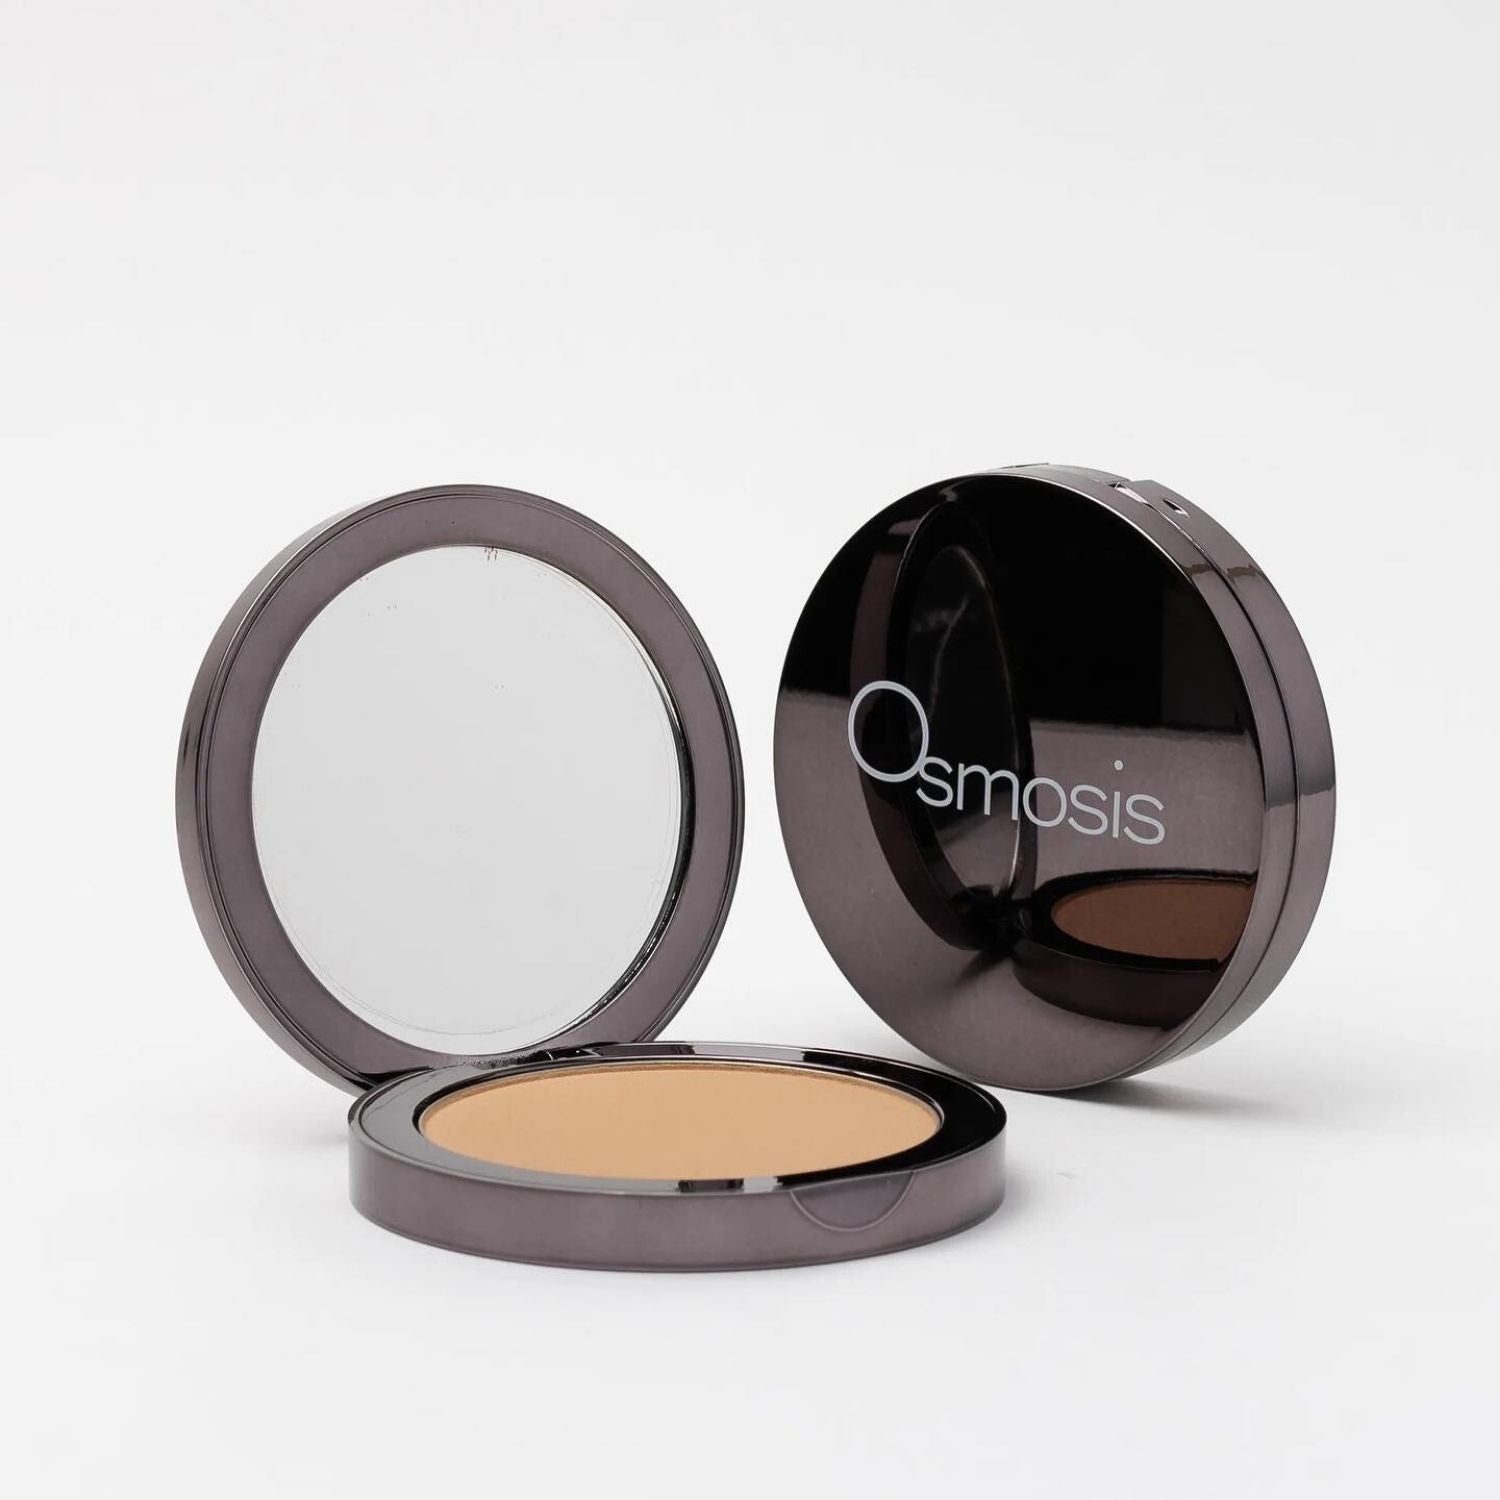 opened compact next to closed compact of pressed base powder on white background 